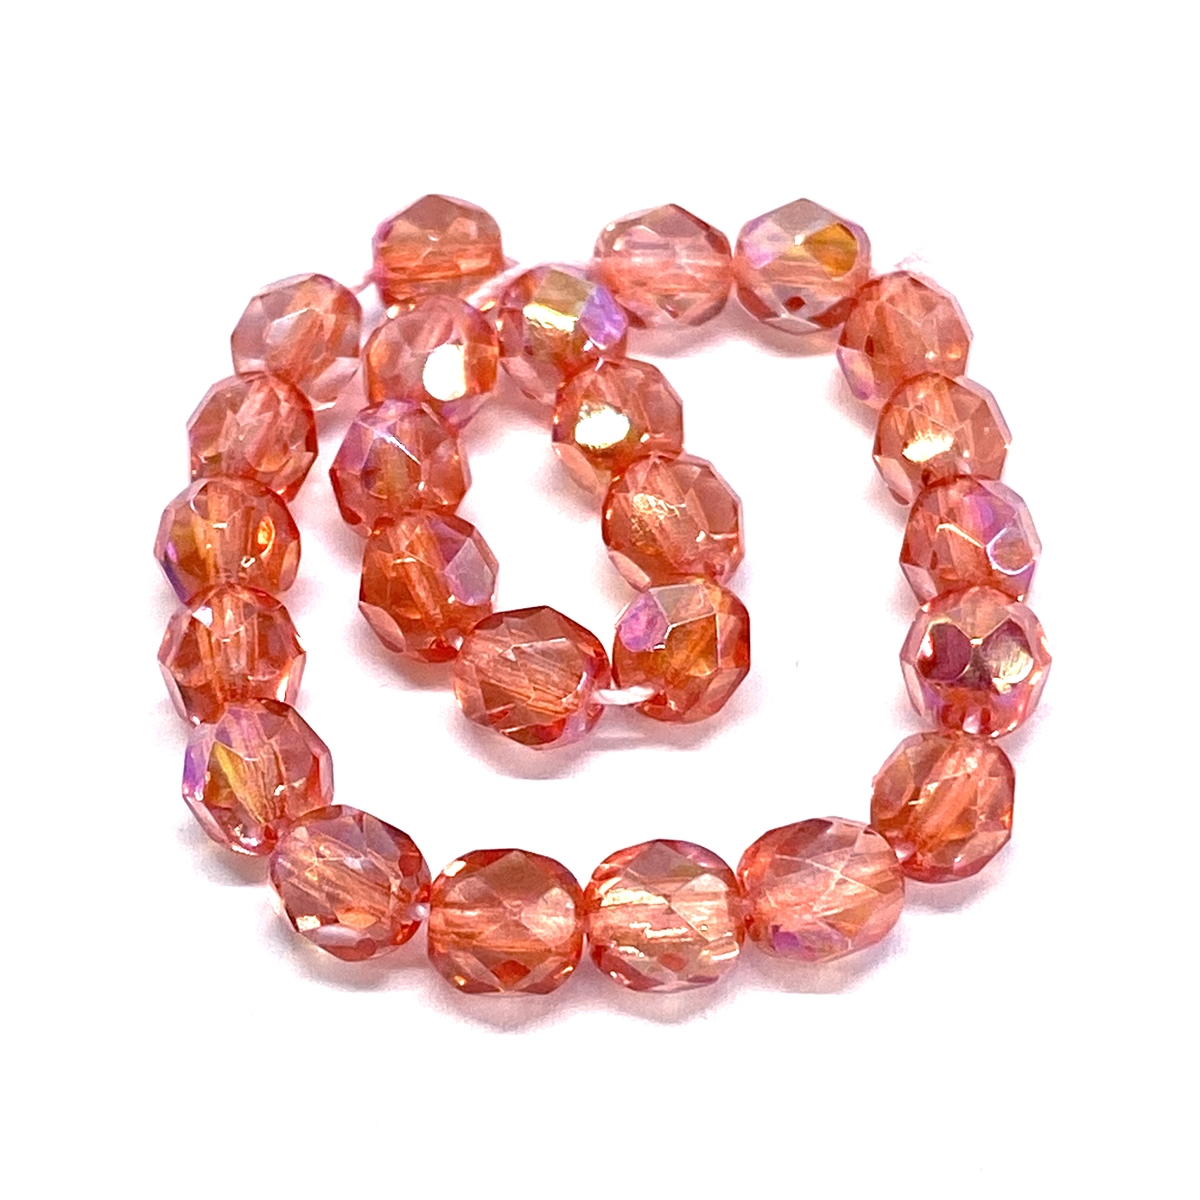 coral AB glass beads, fire polished beads, coral AB fire polished glass ...